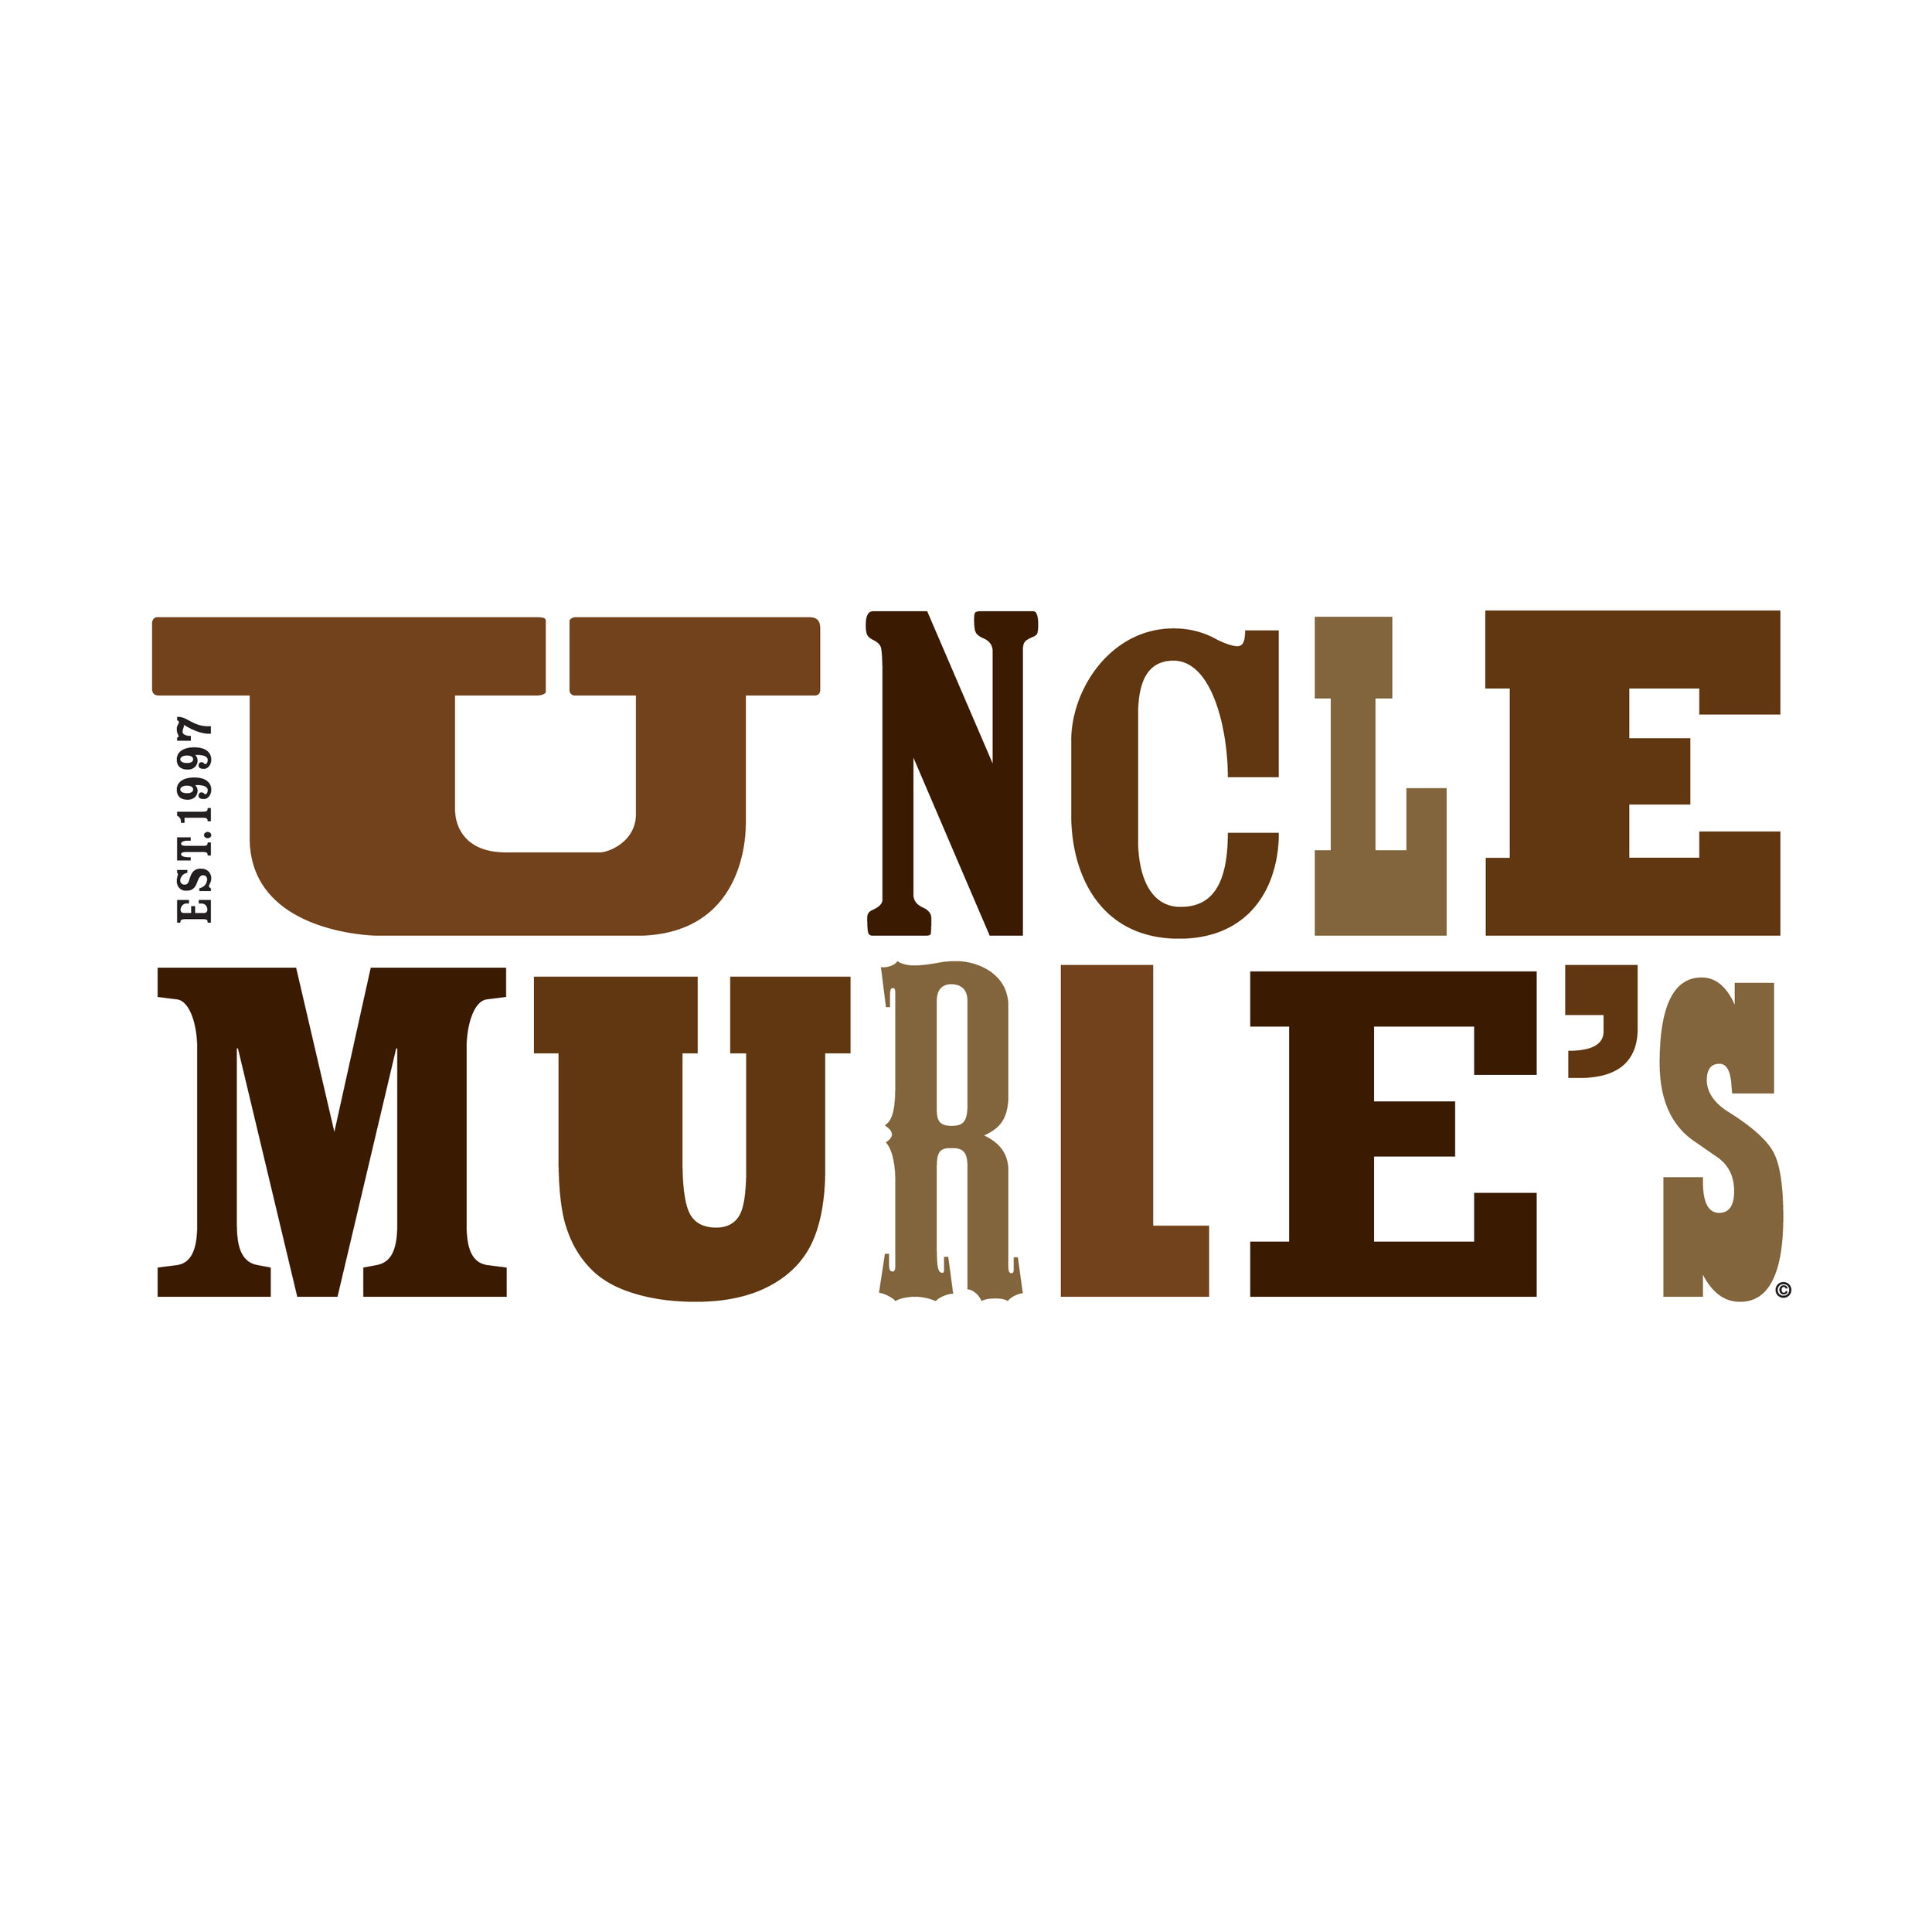  Uncle Murle’s logo  Branding creative and design by Chuck Mitchell 